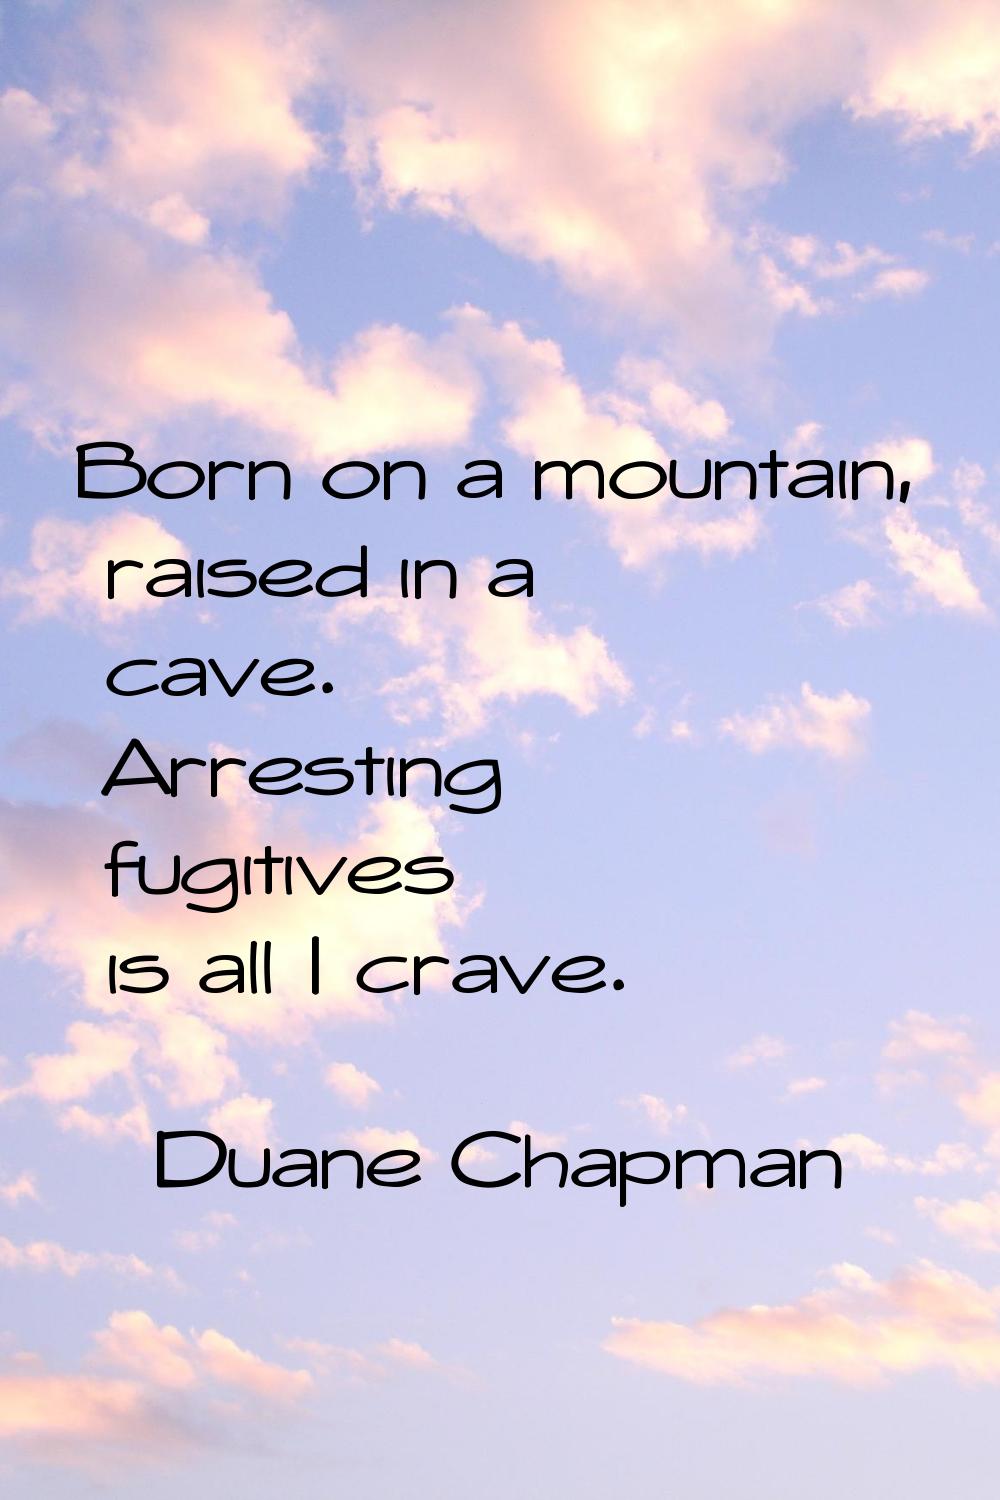 Born on a mountain, raised in a cave. Arresting fugitives is all I crave.